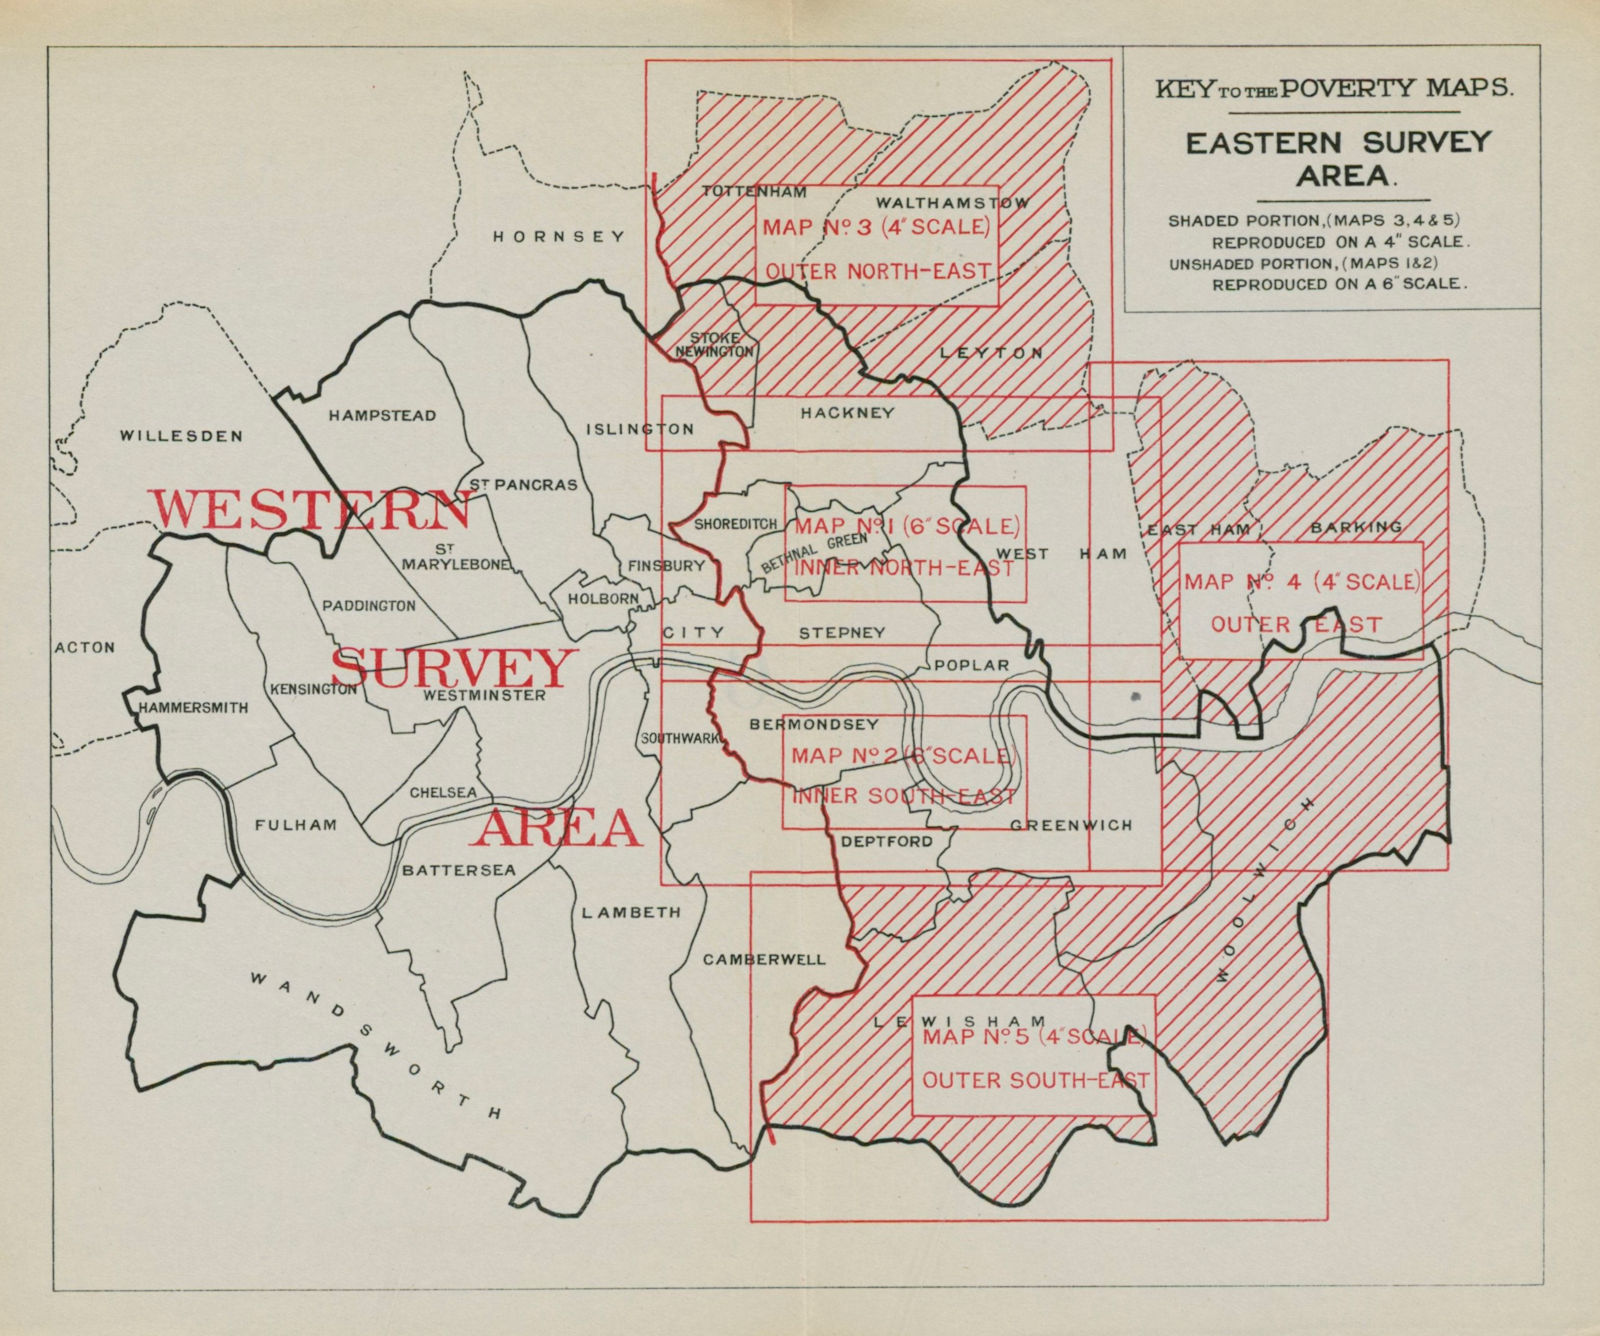 Key to Poverty Maps. Eastern Survey Area. London. Charles Booth / LSE 1931